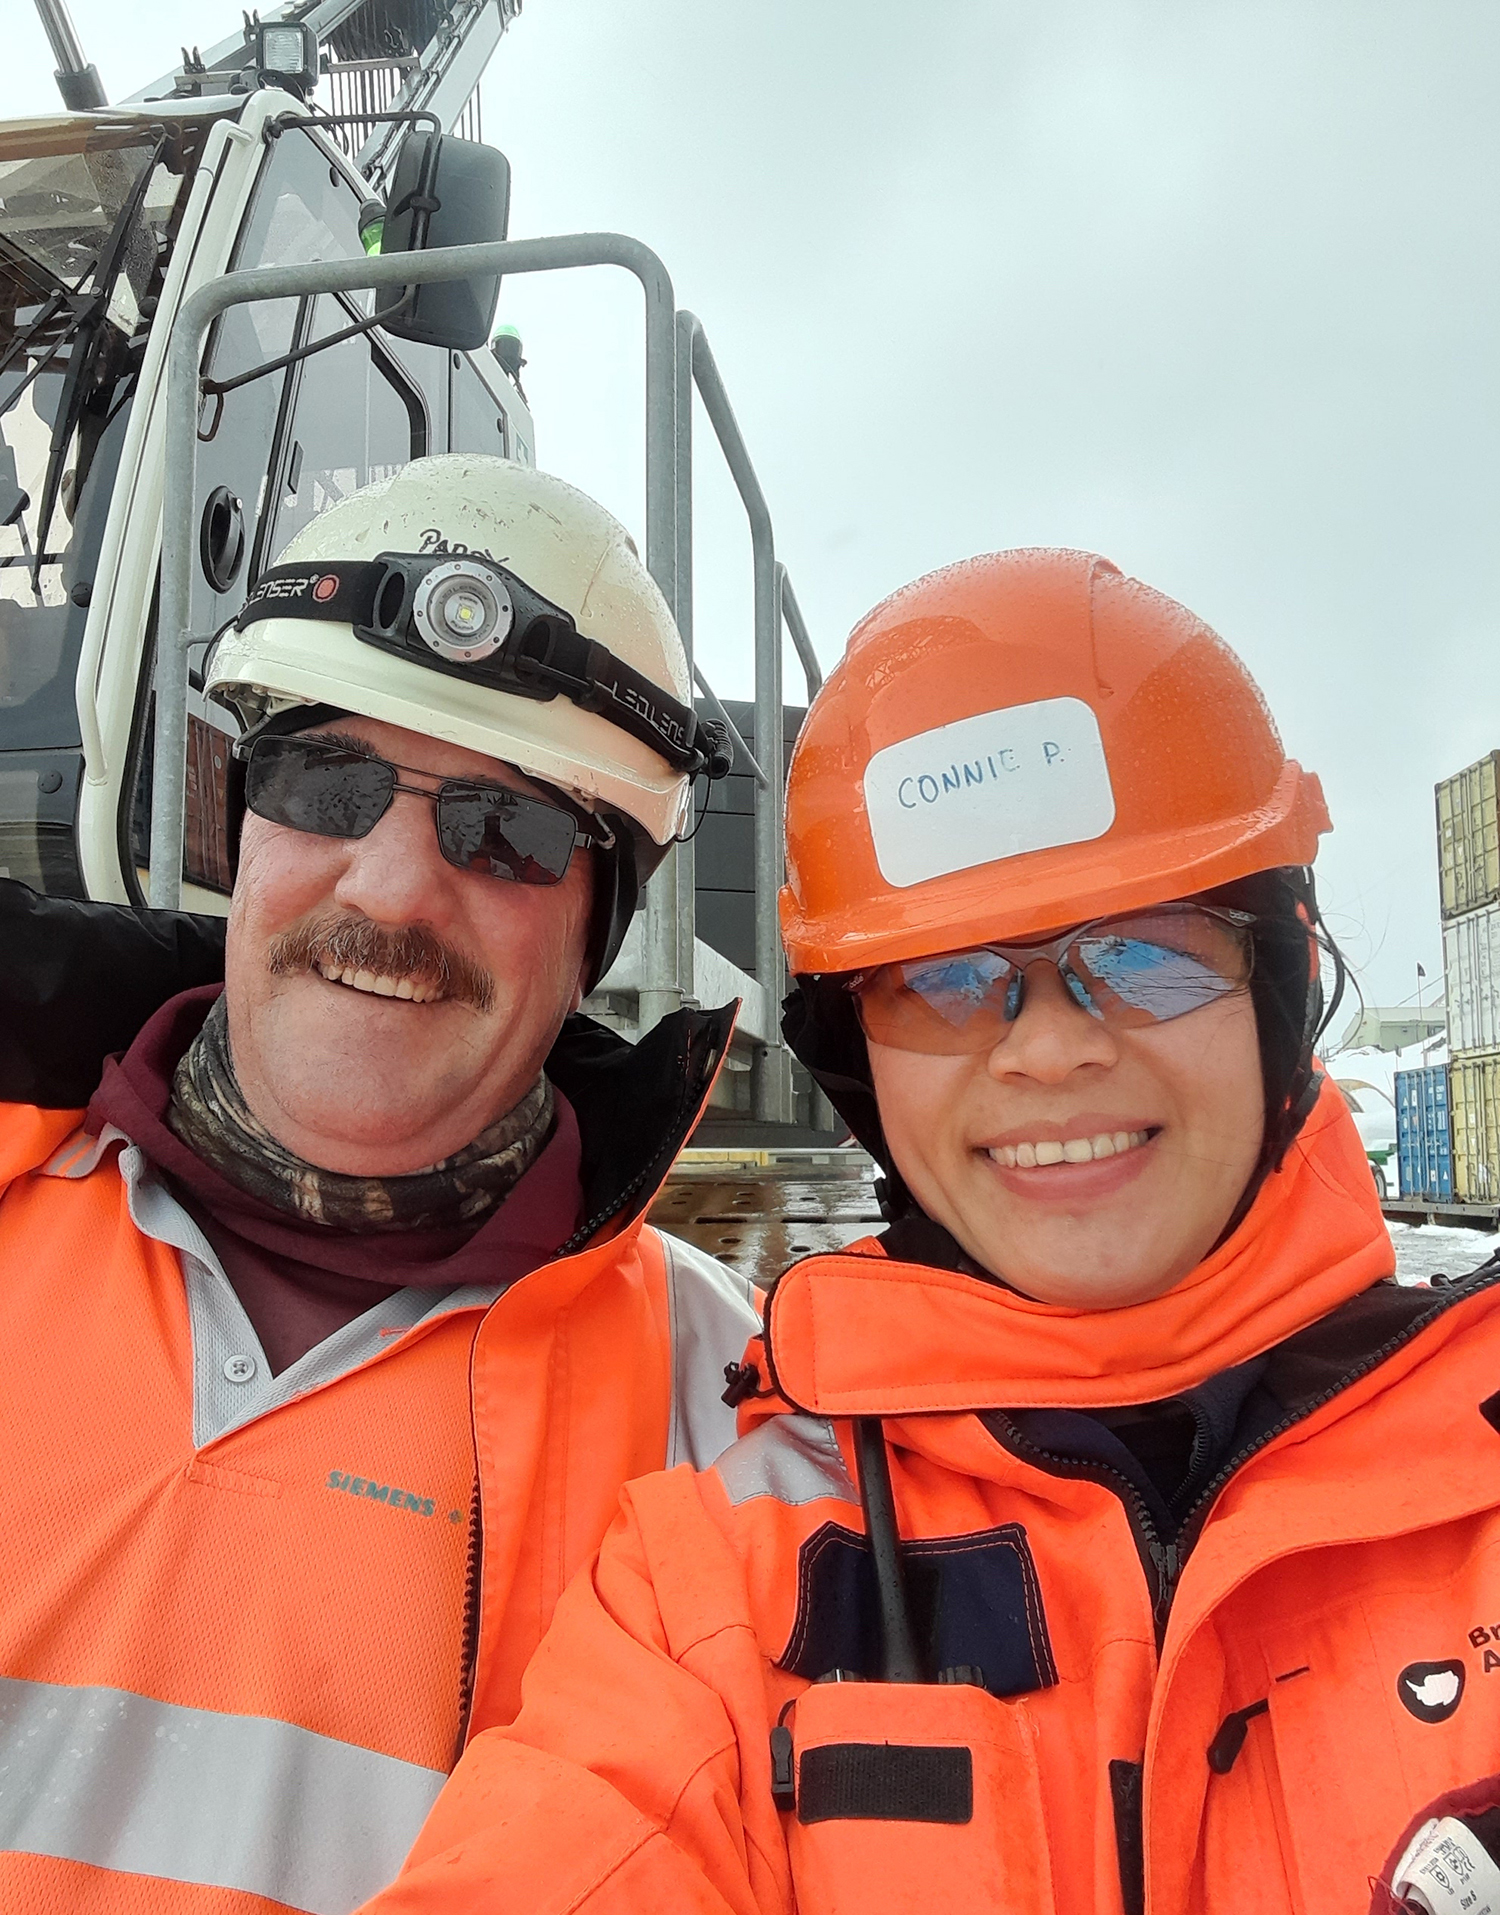 Ramboll engineer Connie Pang, right, with veteran Antarctic builder Paddy Clarke, crane operator with BAM (photo: Connie Pang)